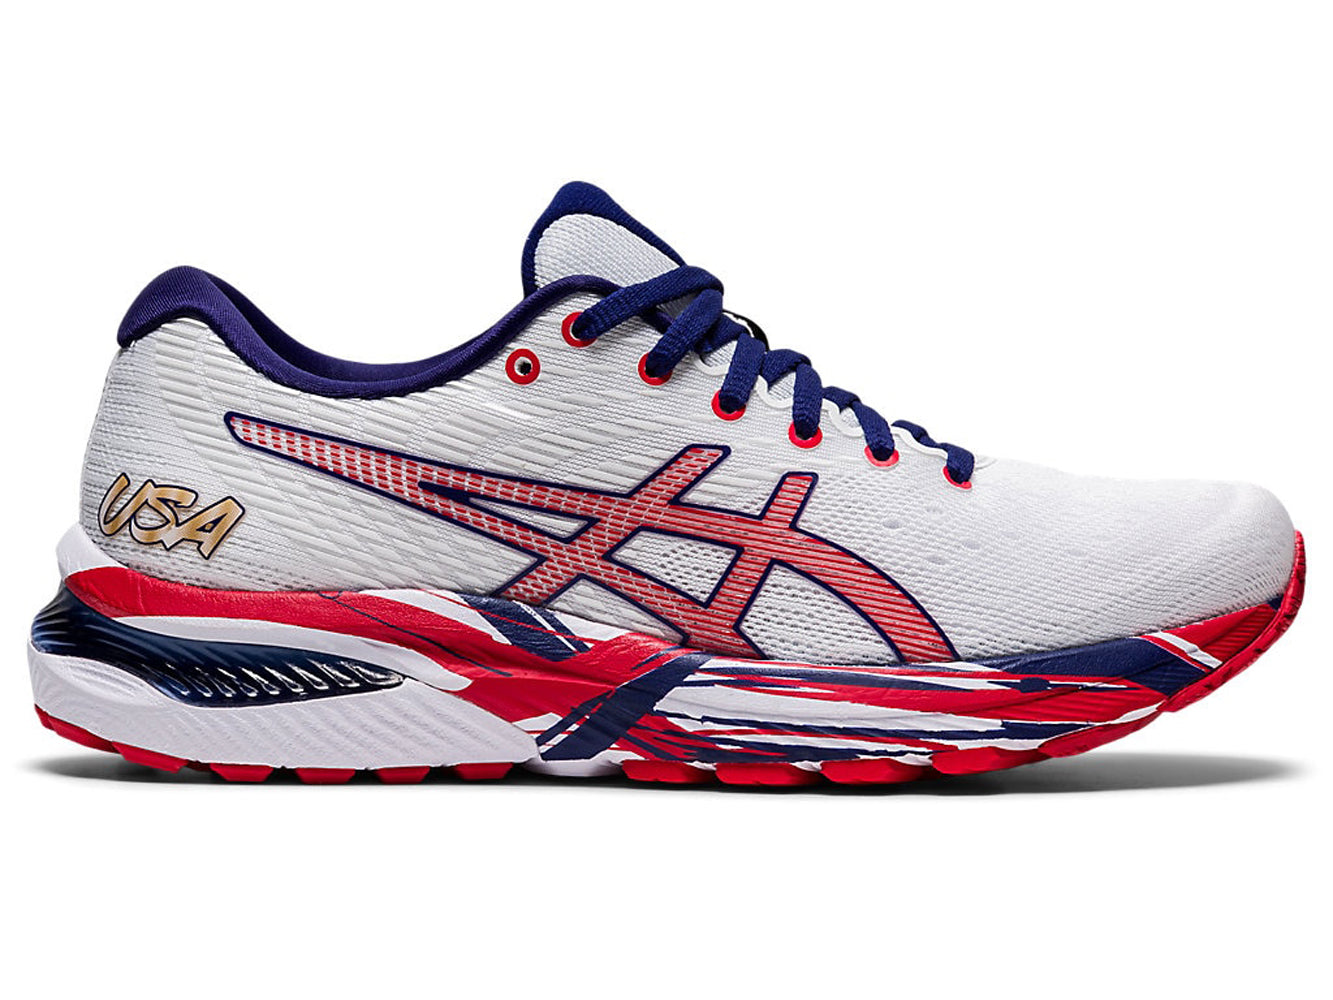 Women's Asics GEL-Cumulus 22 Running Shoe in White/Classic Red from the side